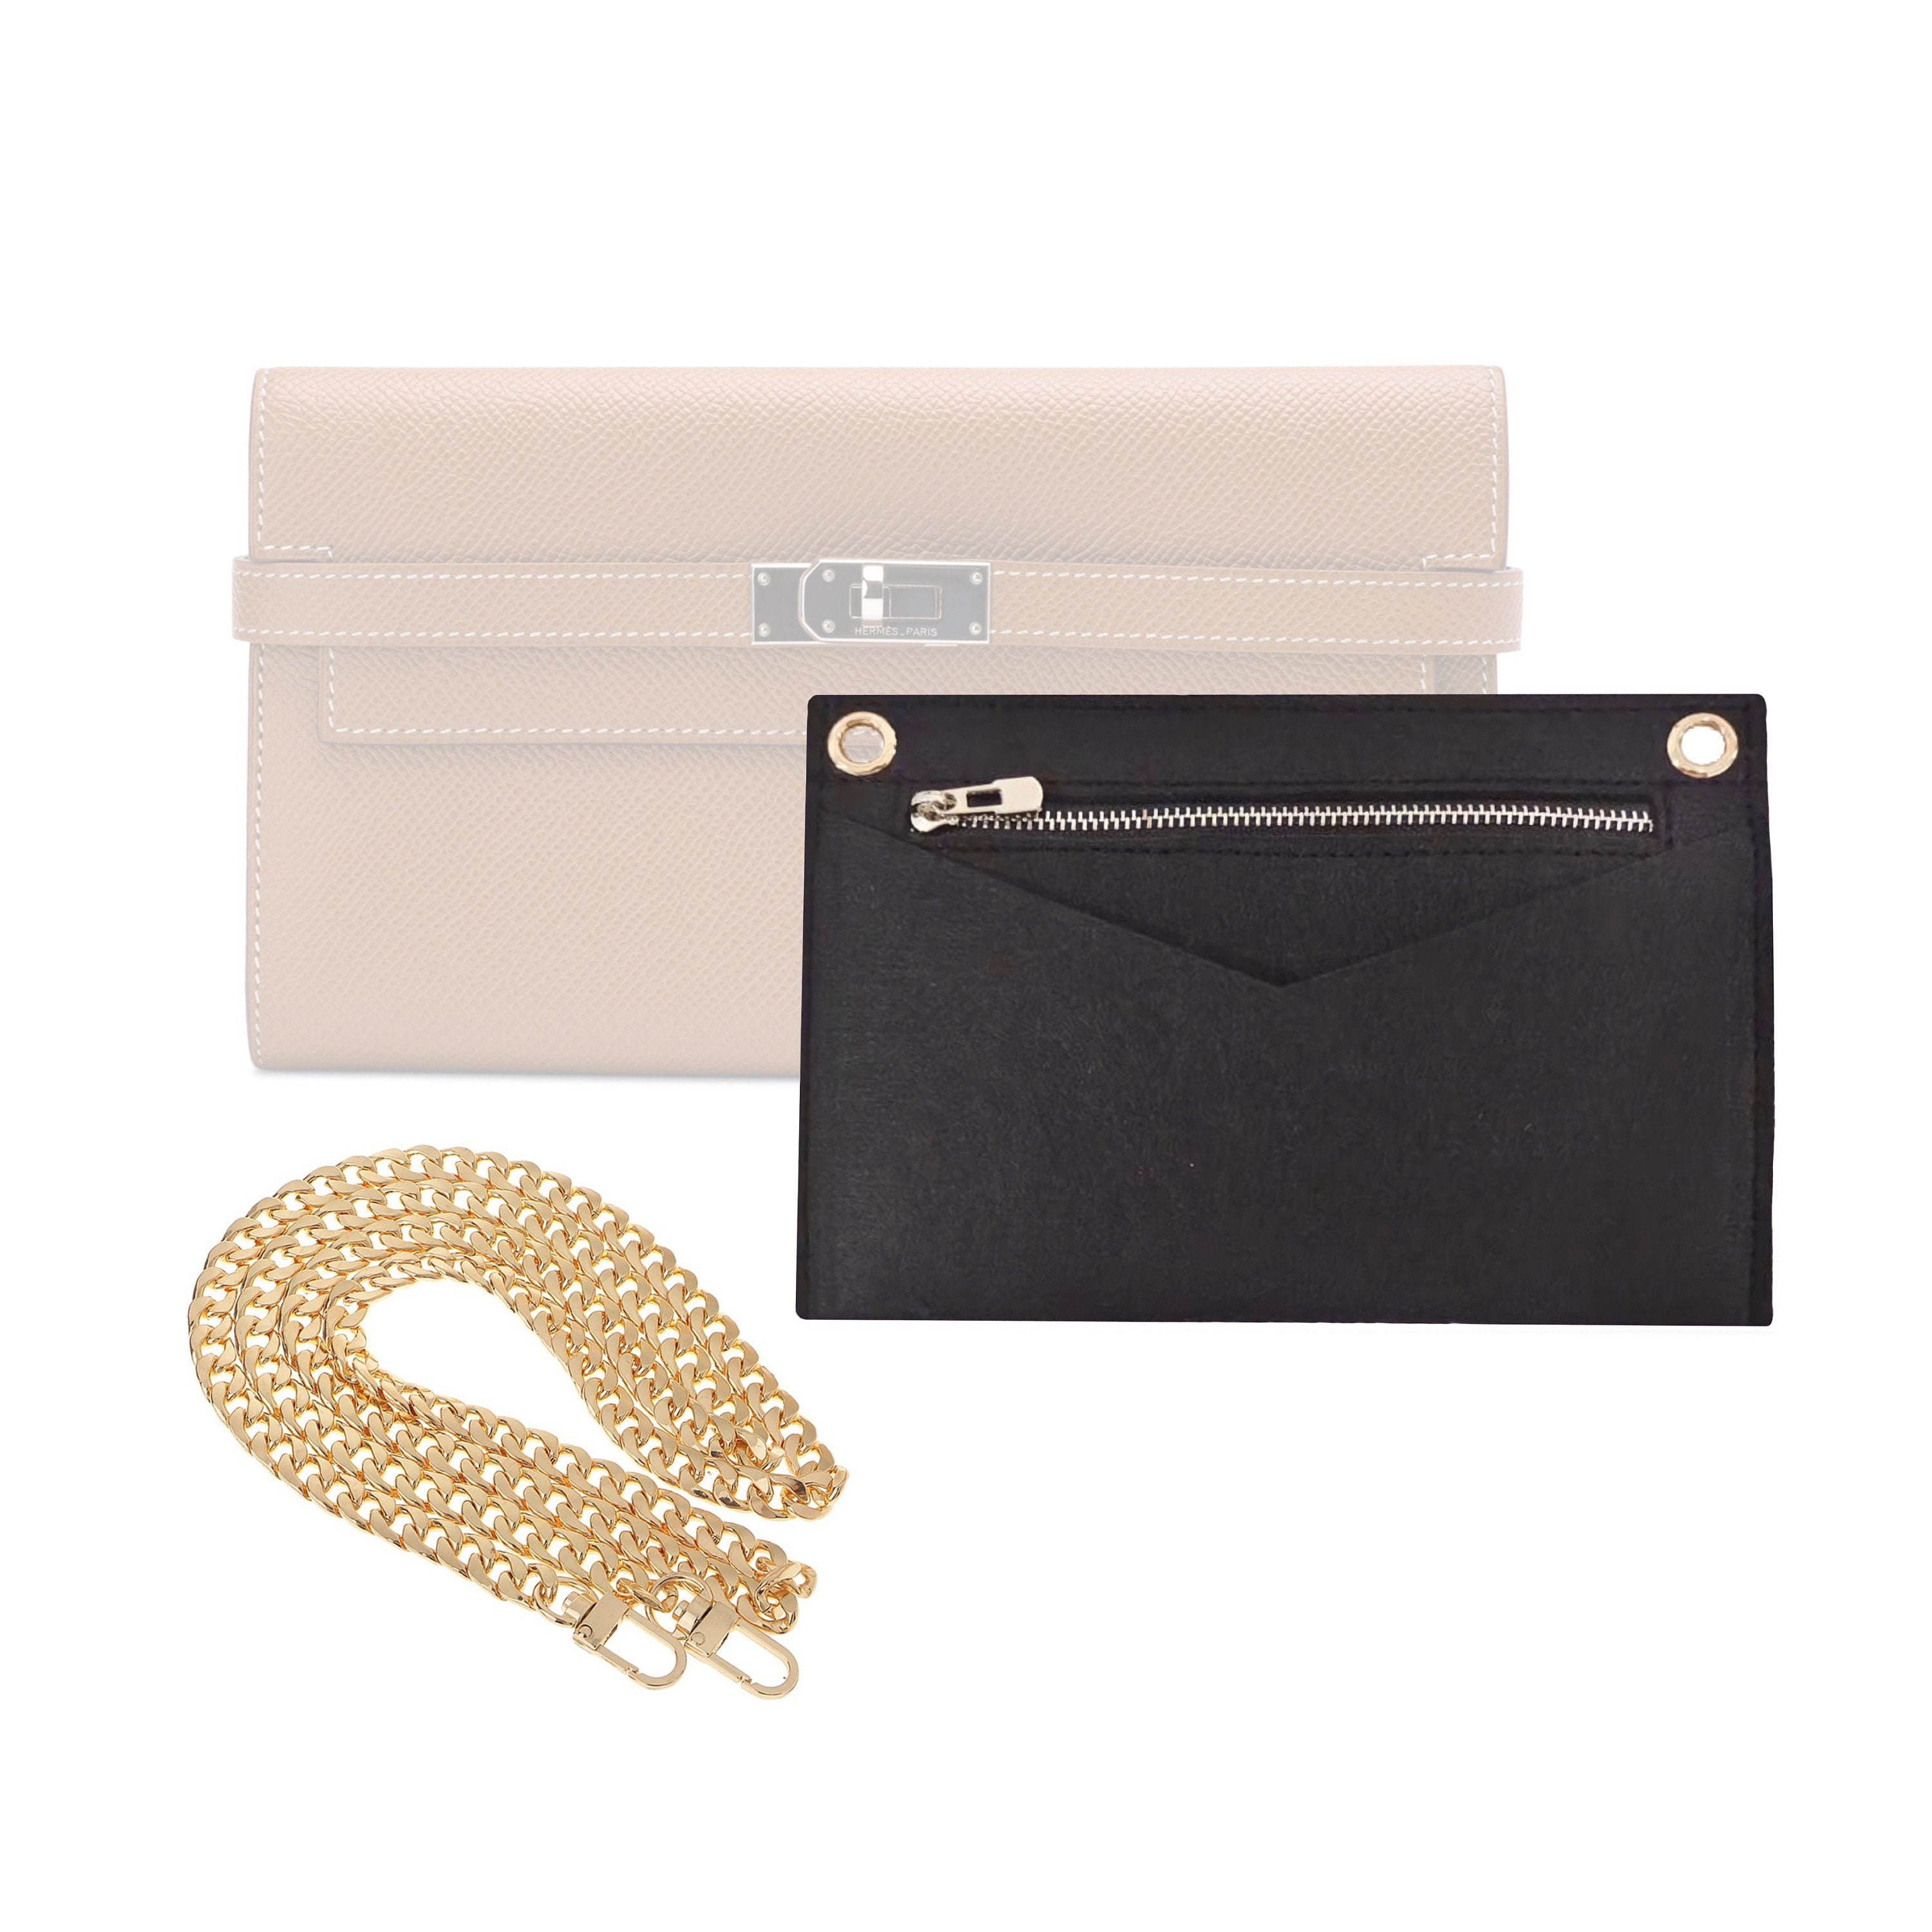  Long Wallet Conversion Kit for Long Flap Wallet Insert & Chain  Strap Wallet on Chain Gold Silver CardHolder Crossbody Converter Kit (120cm  Silver Leather Chain, Sky Blue) : Handmade Products